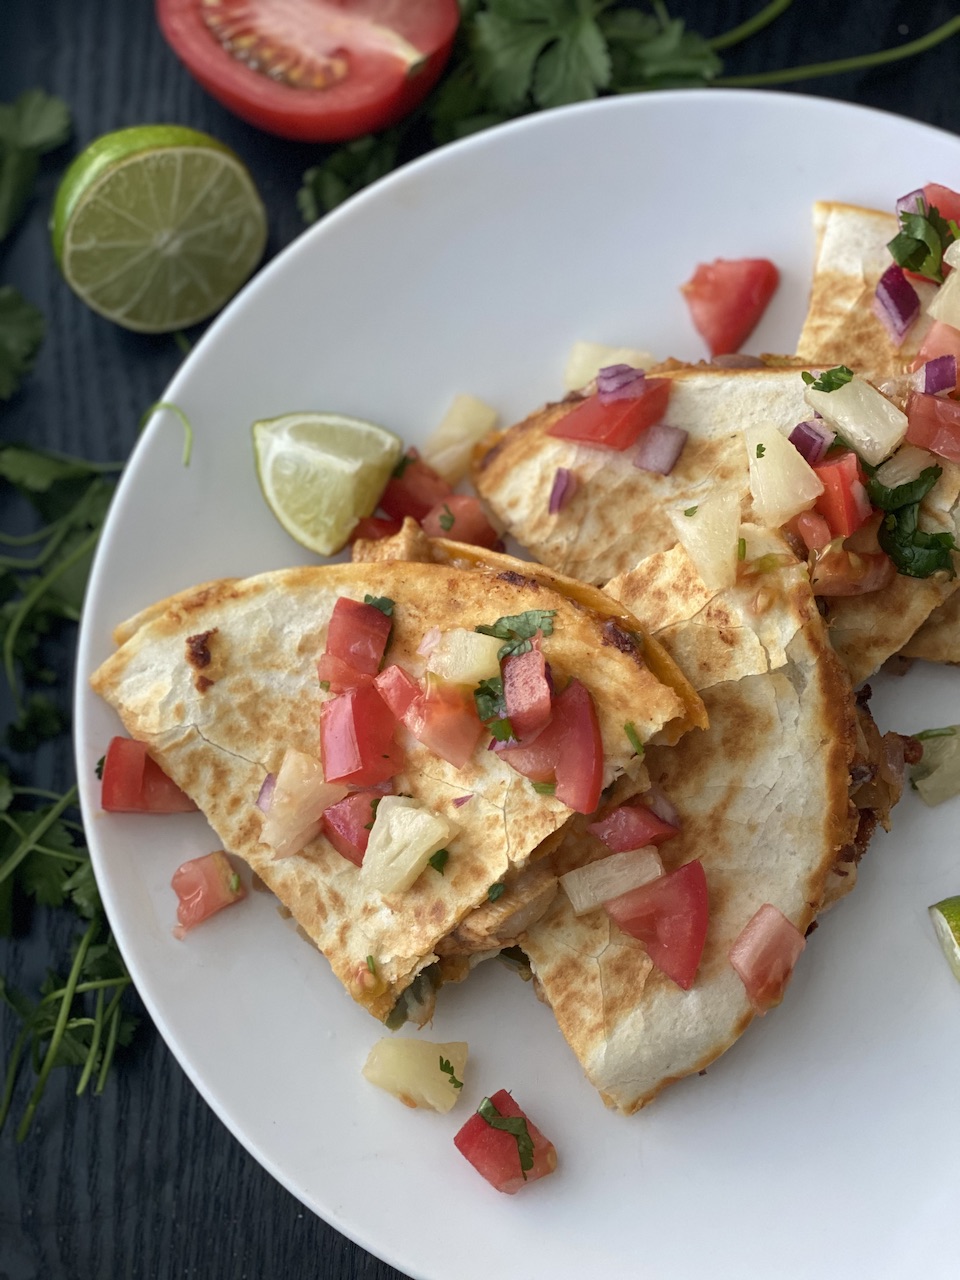 Chipotle Chicken and Pineapple Quesadilla